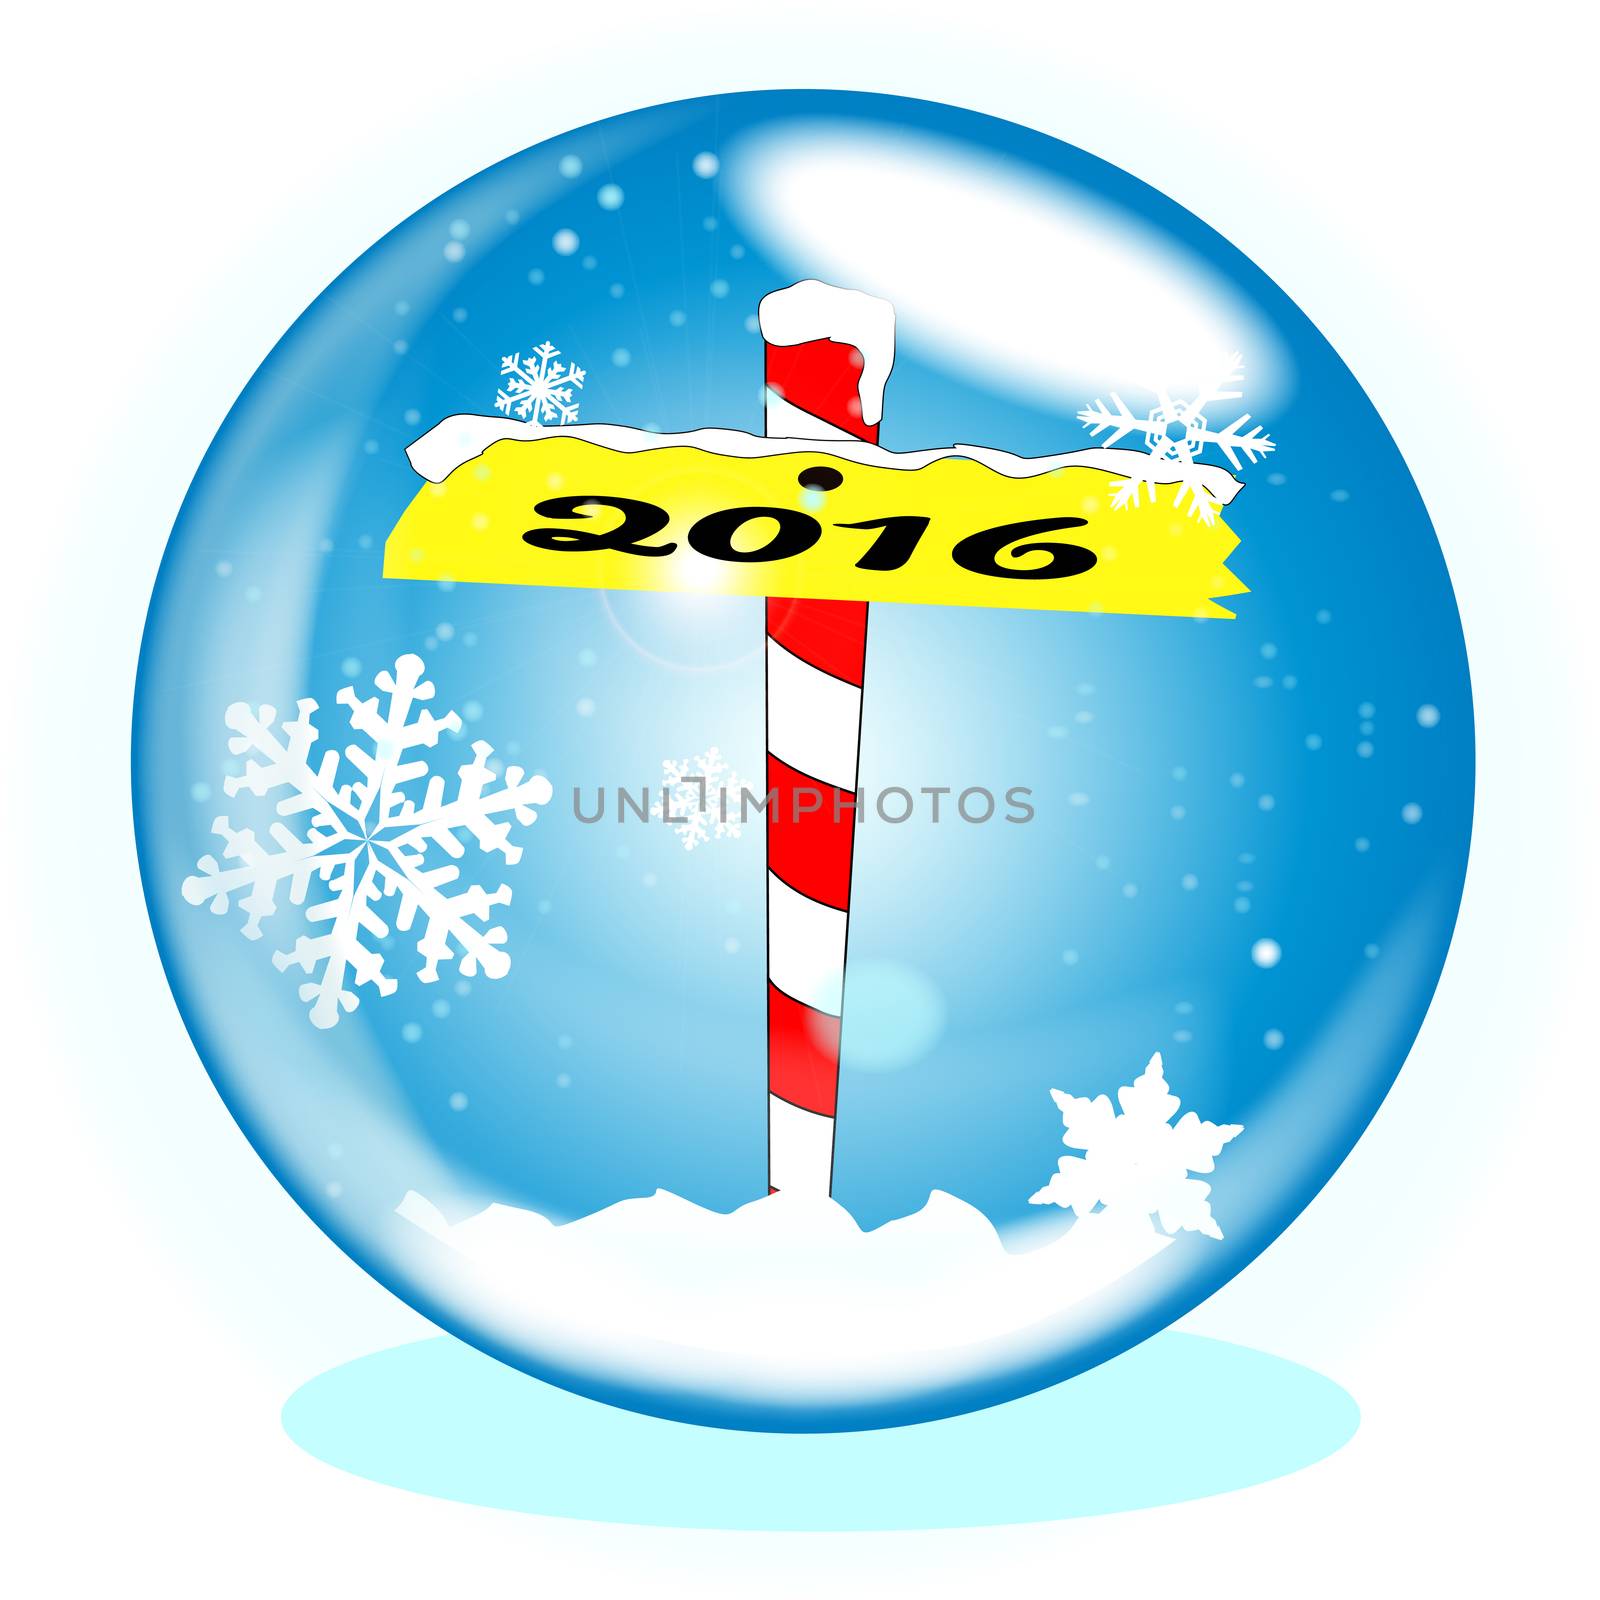 A crystal ball over a winter scene background with a North Pole sign